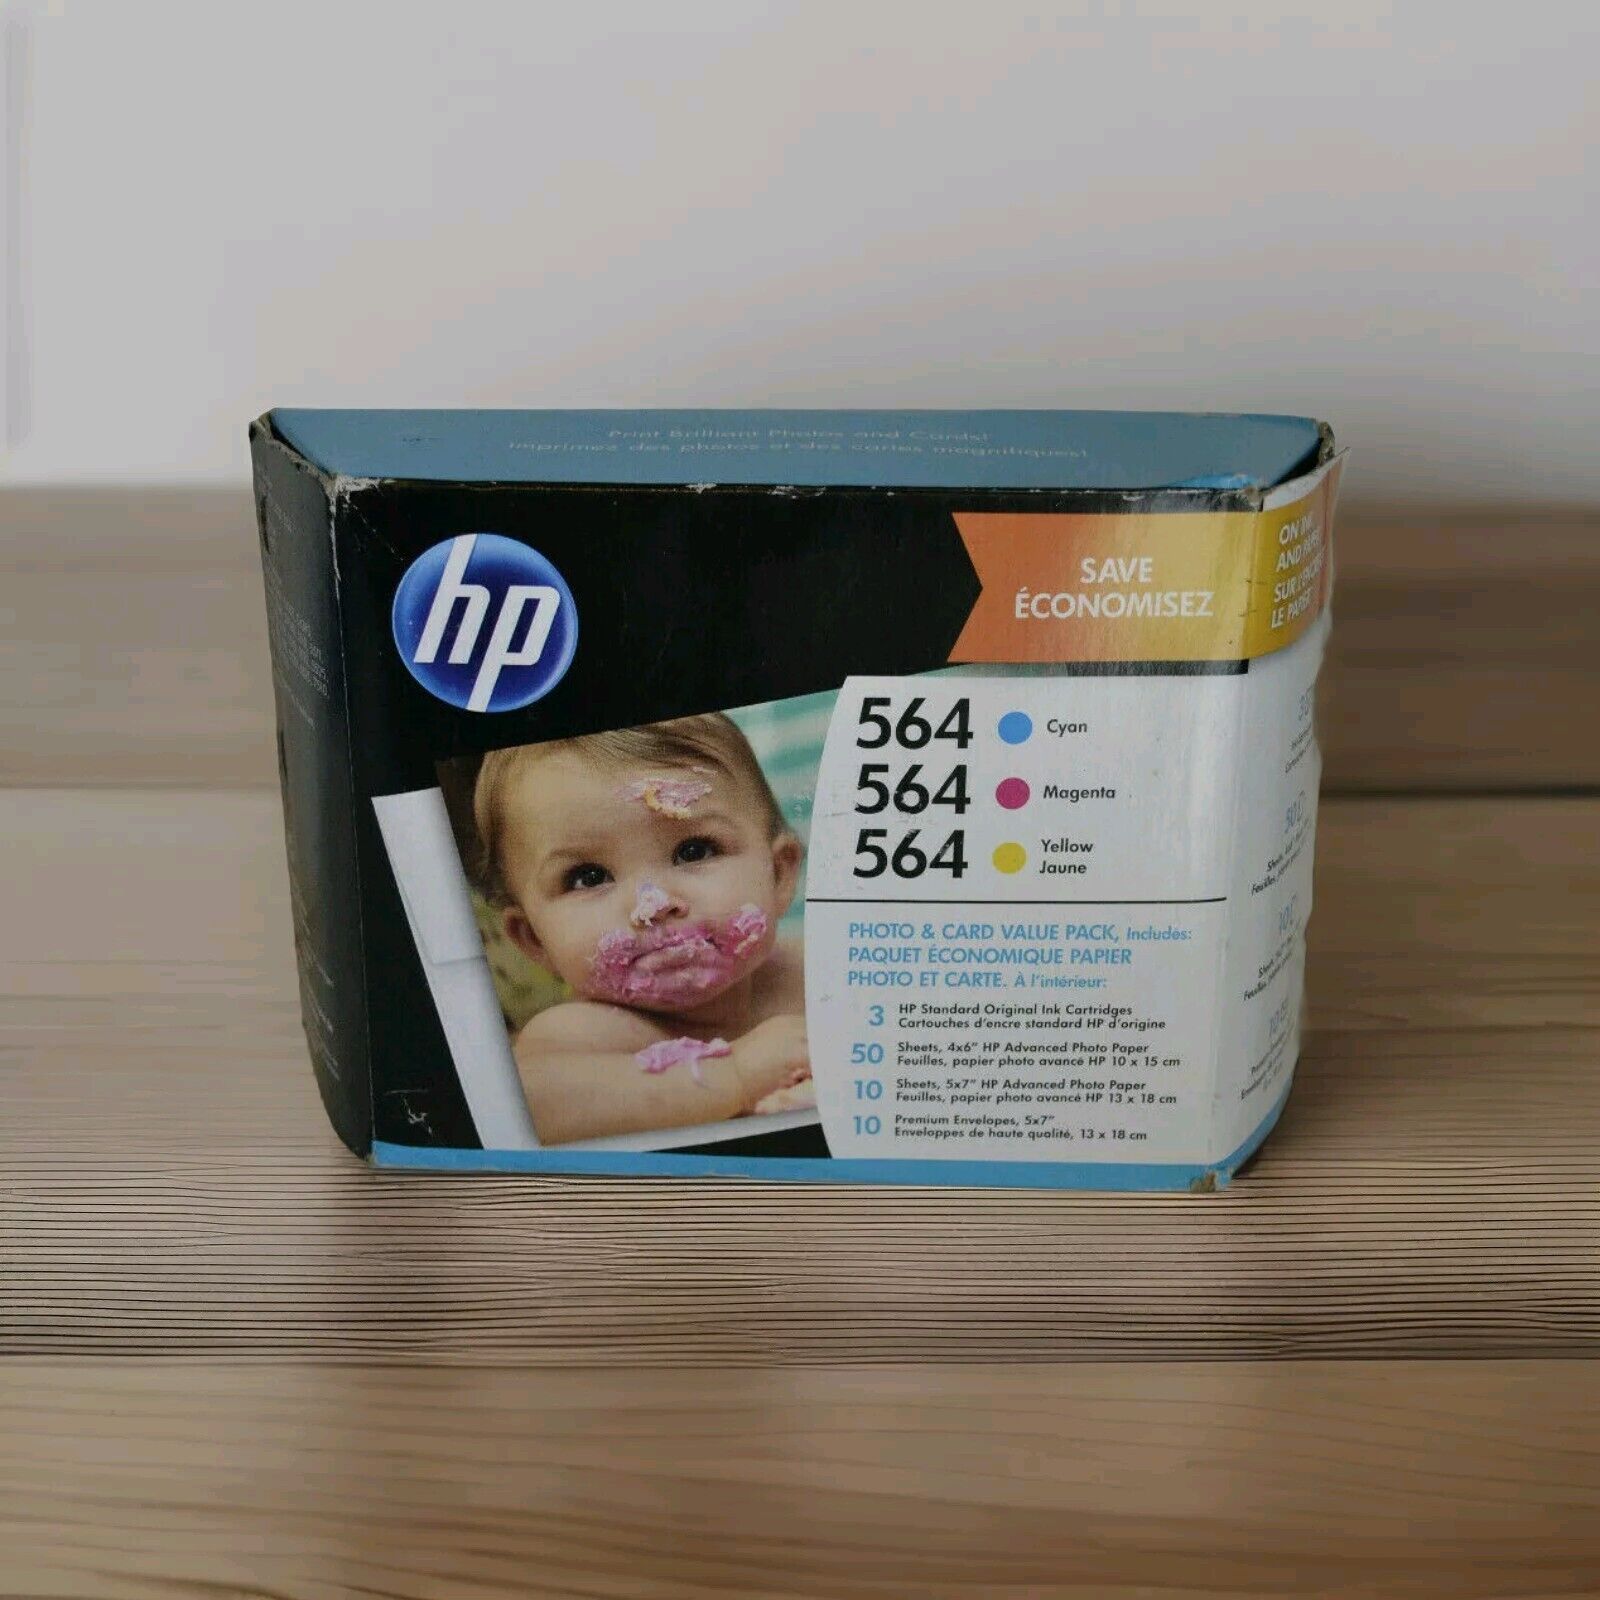 HP 564 Color Ink Bundle with 4x6 and 5x7 Paper and Envelopes - Expired 2019